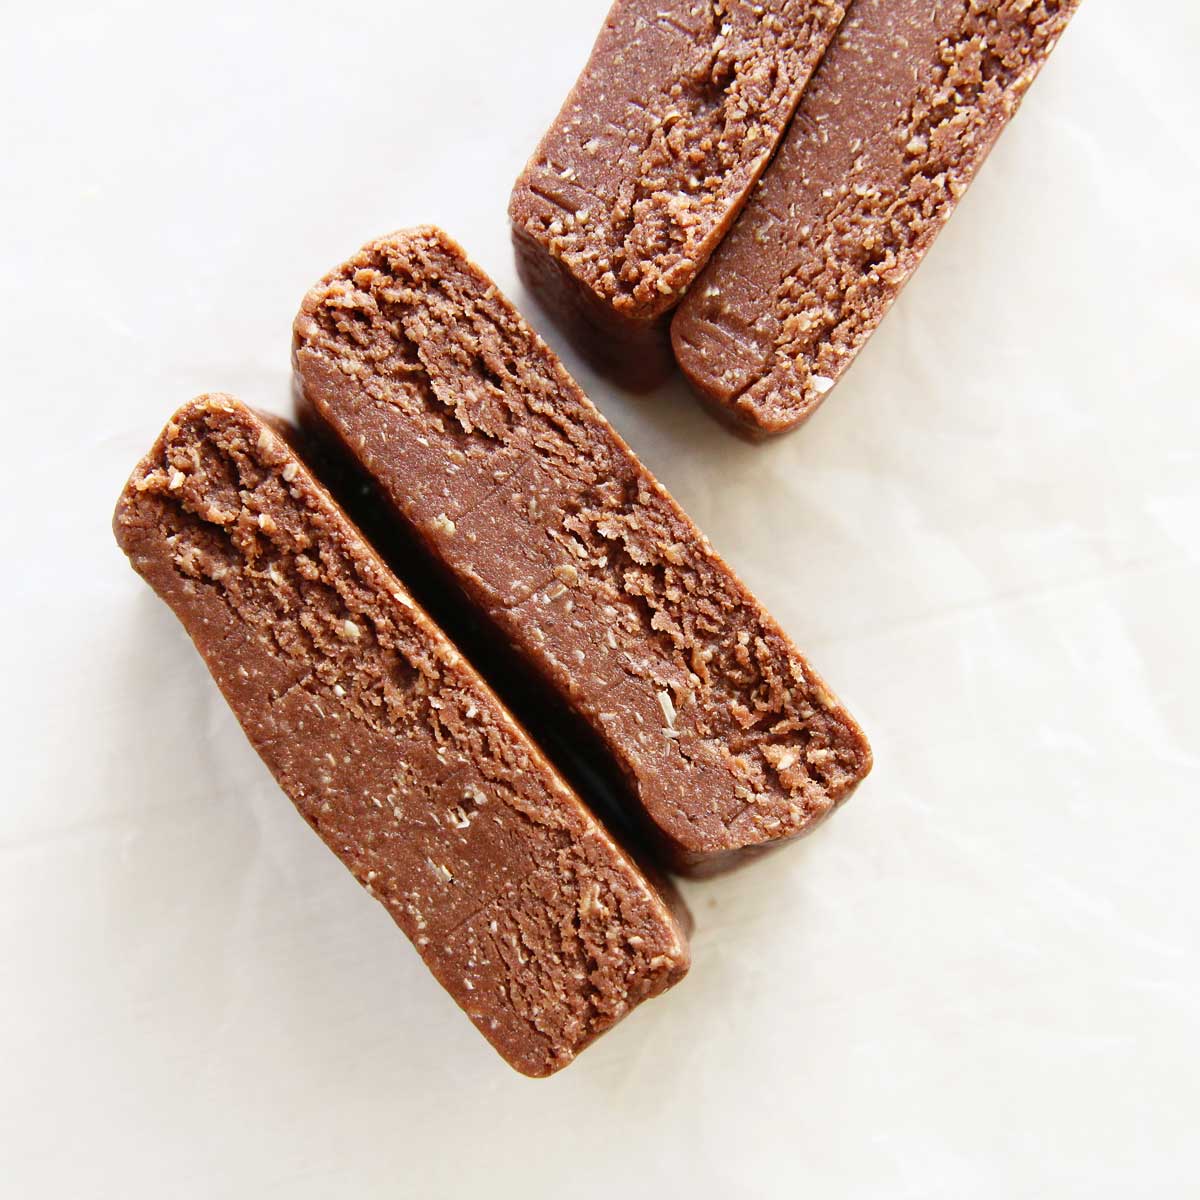 10-Minute Chocolate Peanut Butter Oatmeal Protein Bars - Walnut Butter Mooncakes